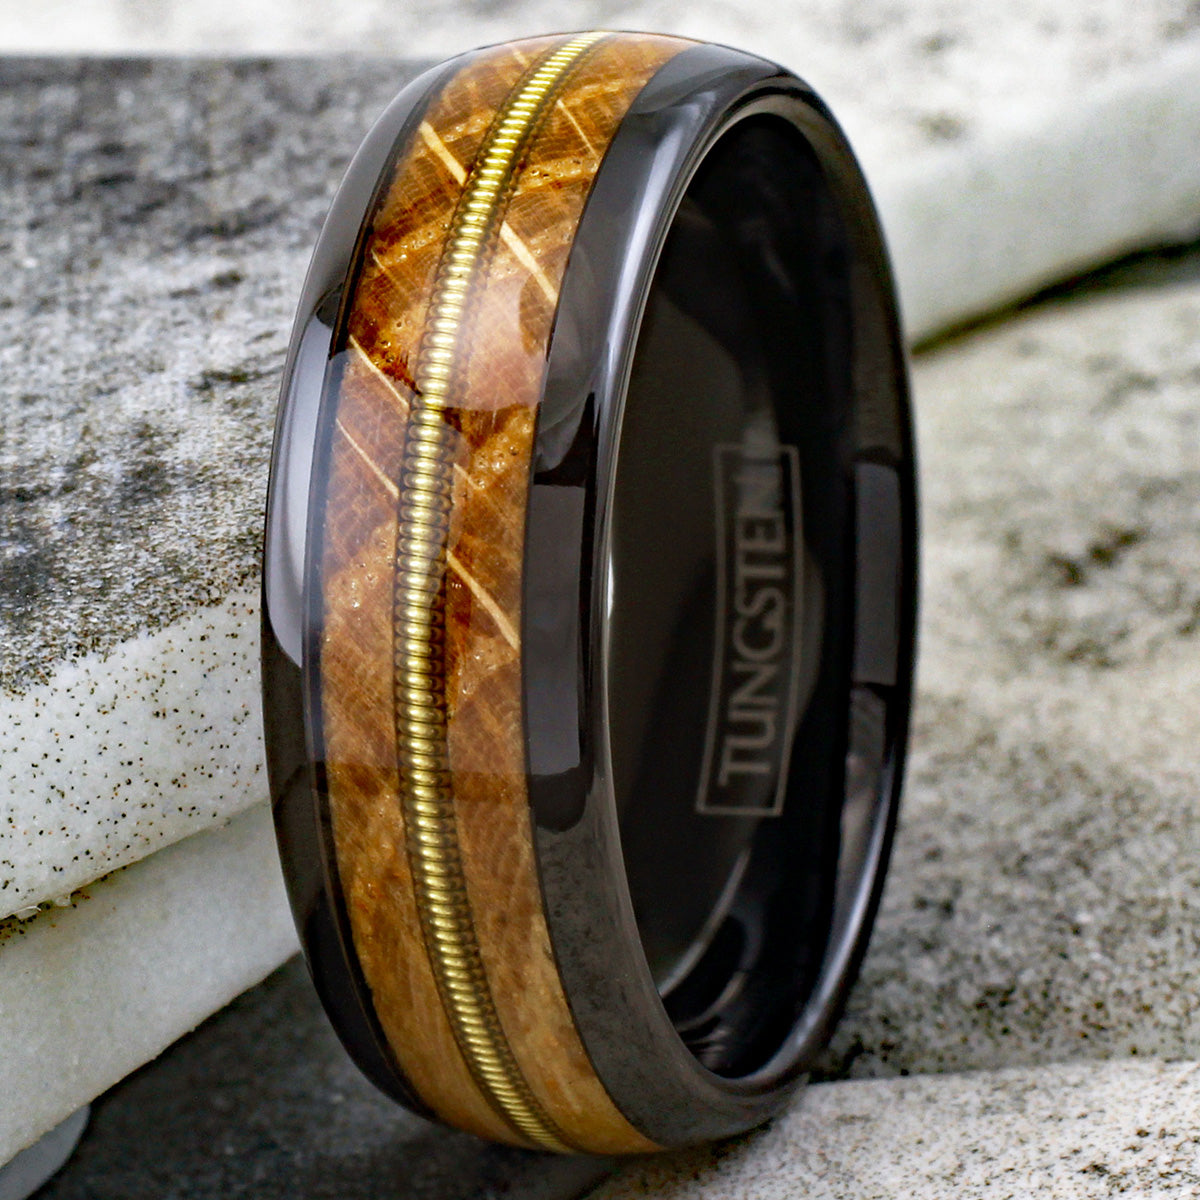 Gorgeous Polished Black Tungsten Low Dome Ring with Cool Genuine Guitar String Between Whiskey Barrel Oak Wood Inlays. Couple Ring.